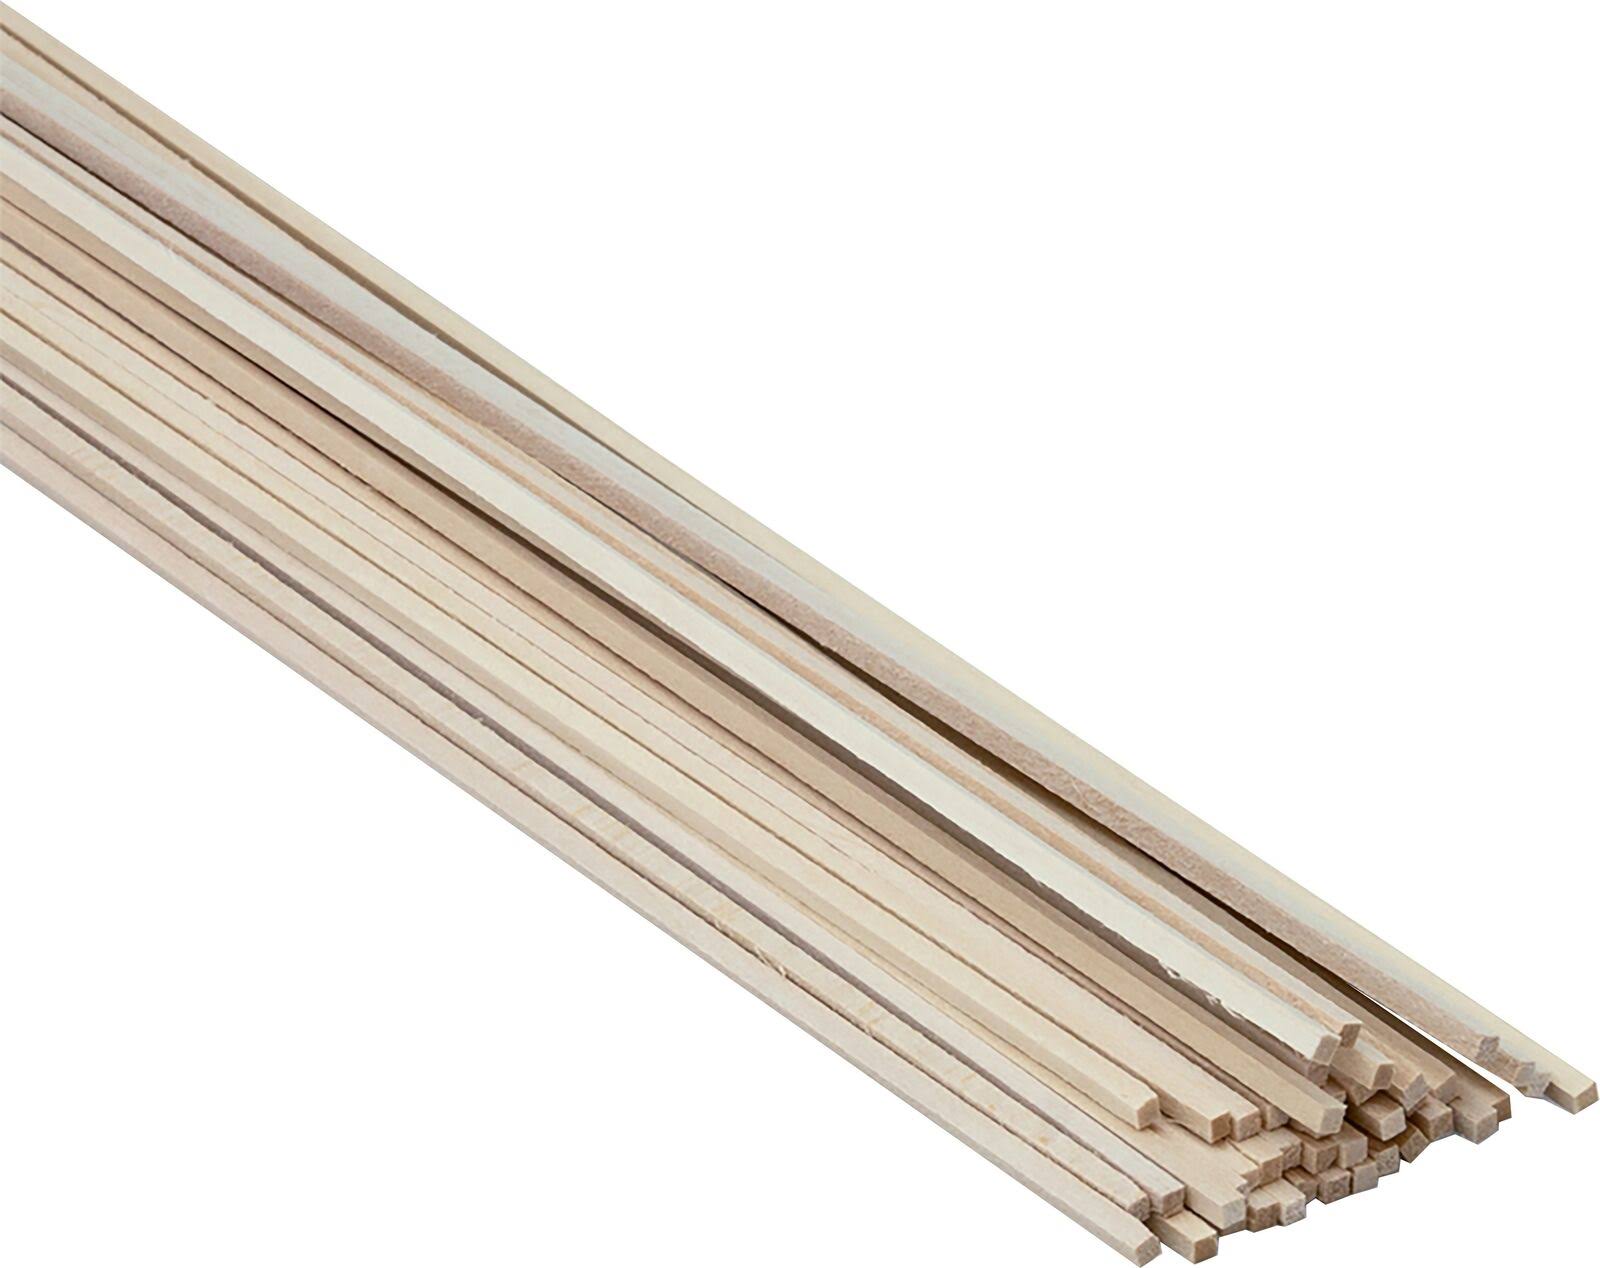 Midwest Basswood Strips - 1/8 x 1/8 x 24 in., 48 pieces